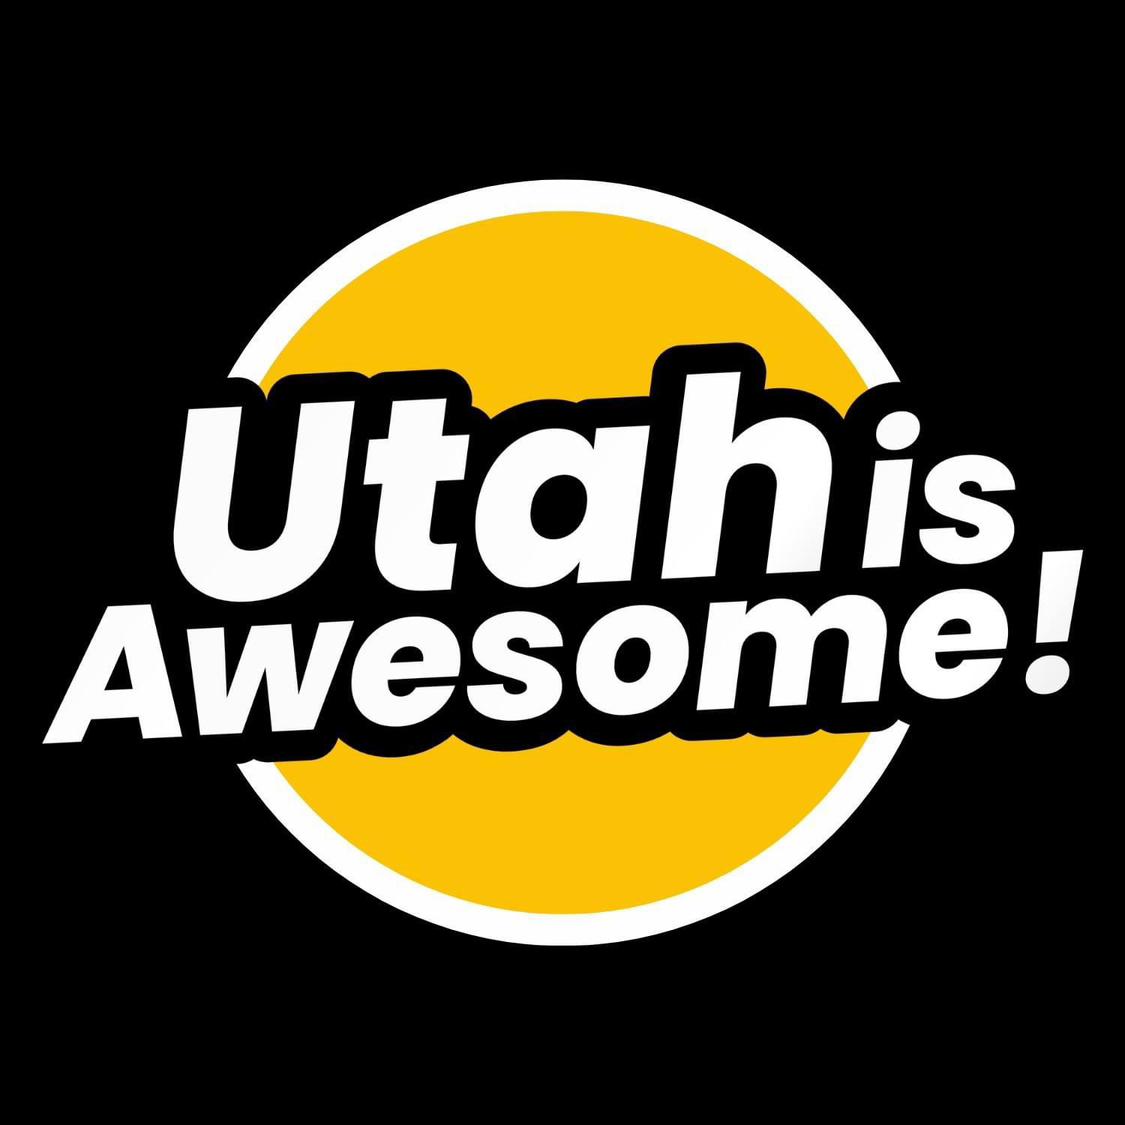 Utah is Awesome's images